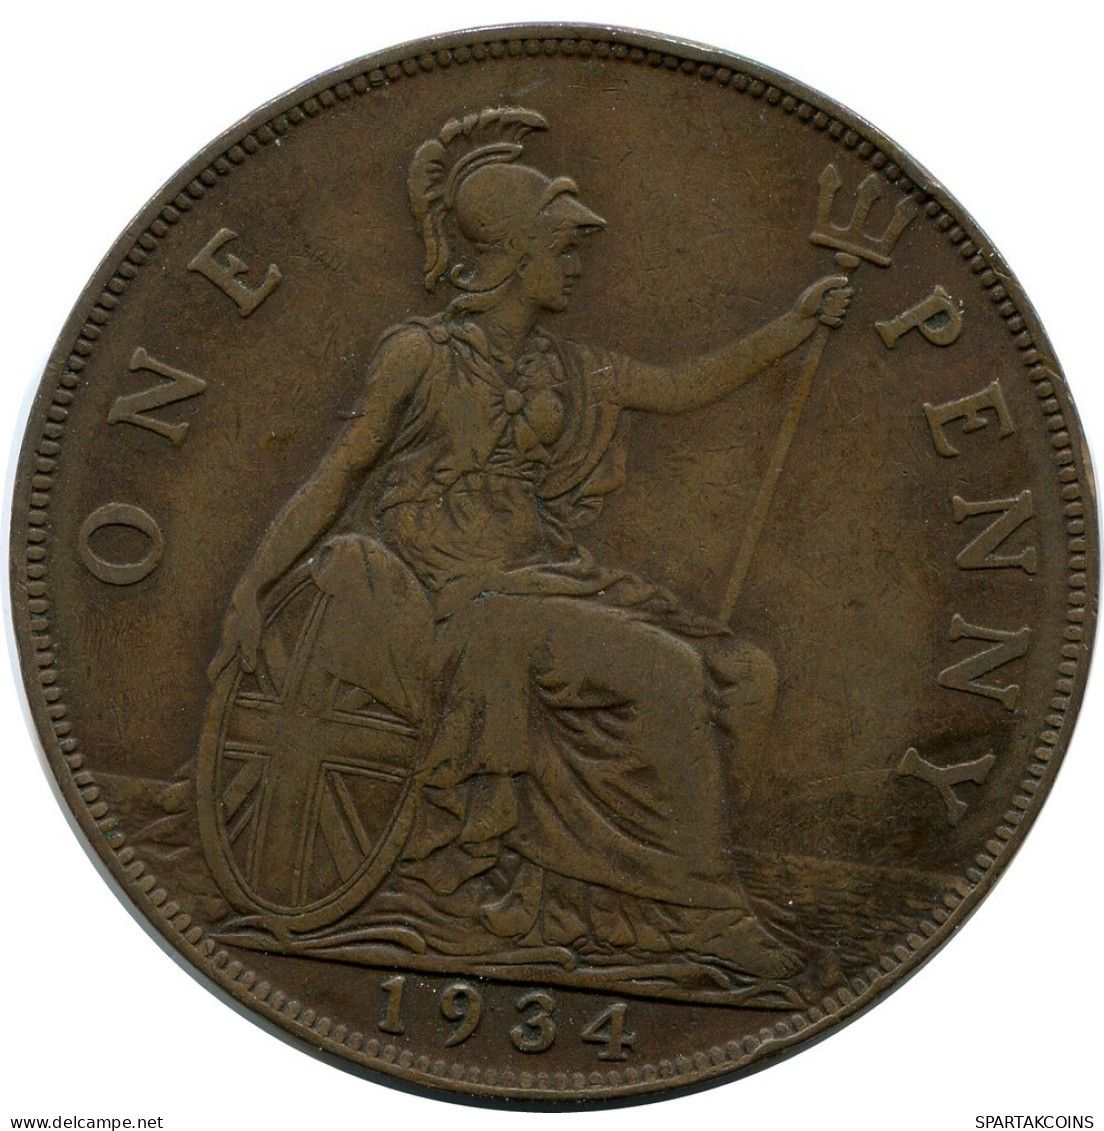 PENNY 1934 UK GREAT BRITAIN Coin #BB018.U.A - D. 1 Penny